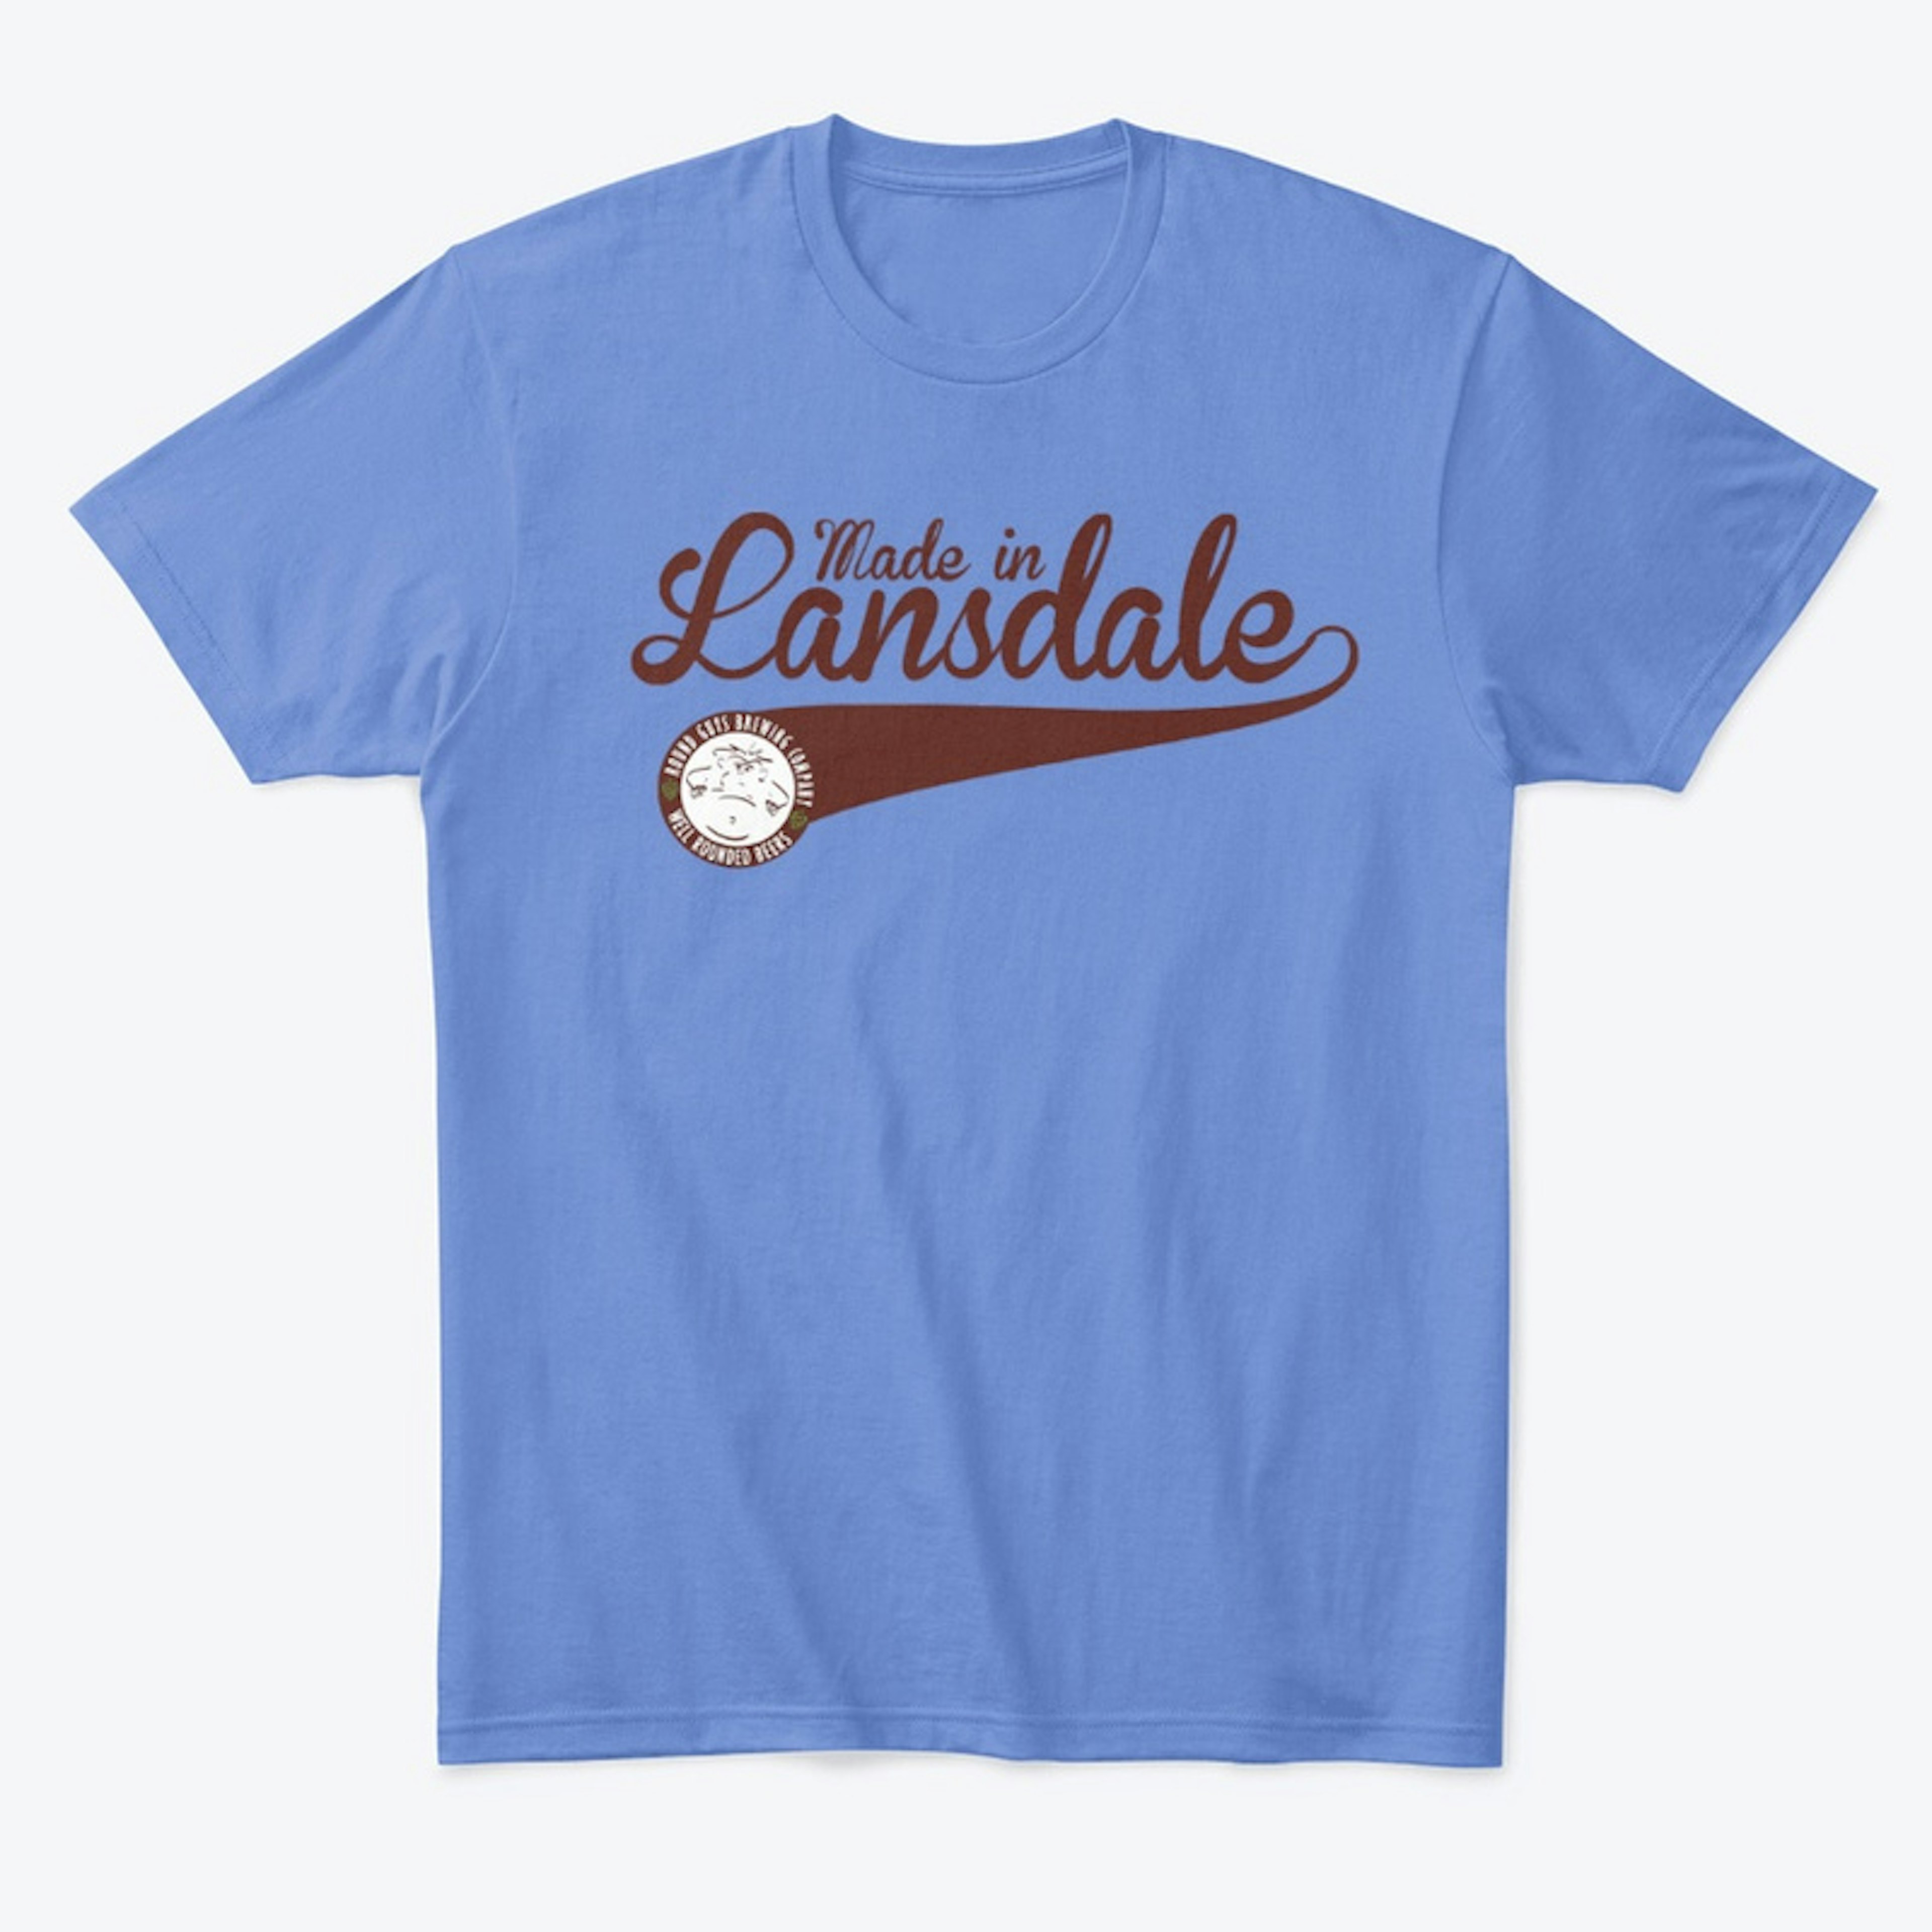 Made in Lansdale